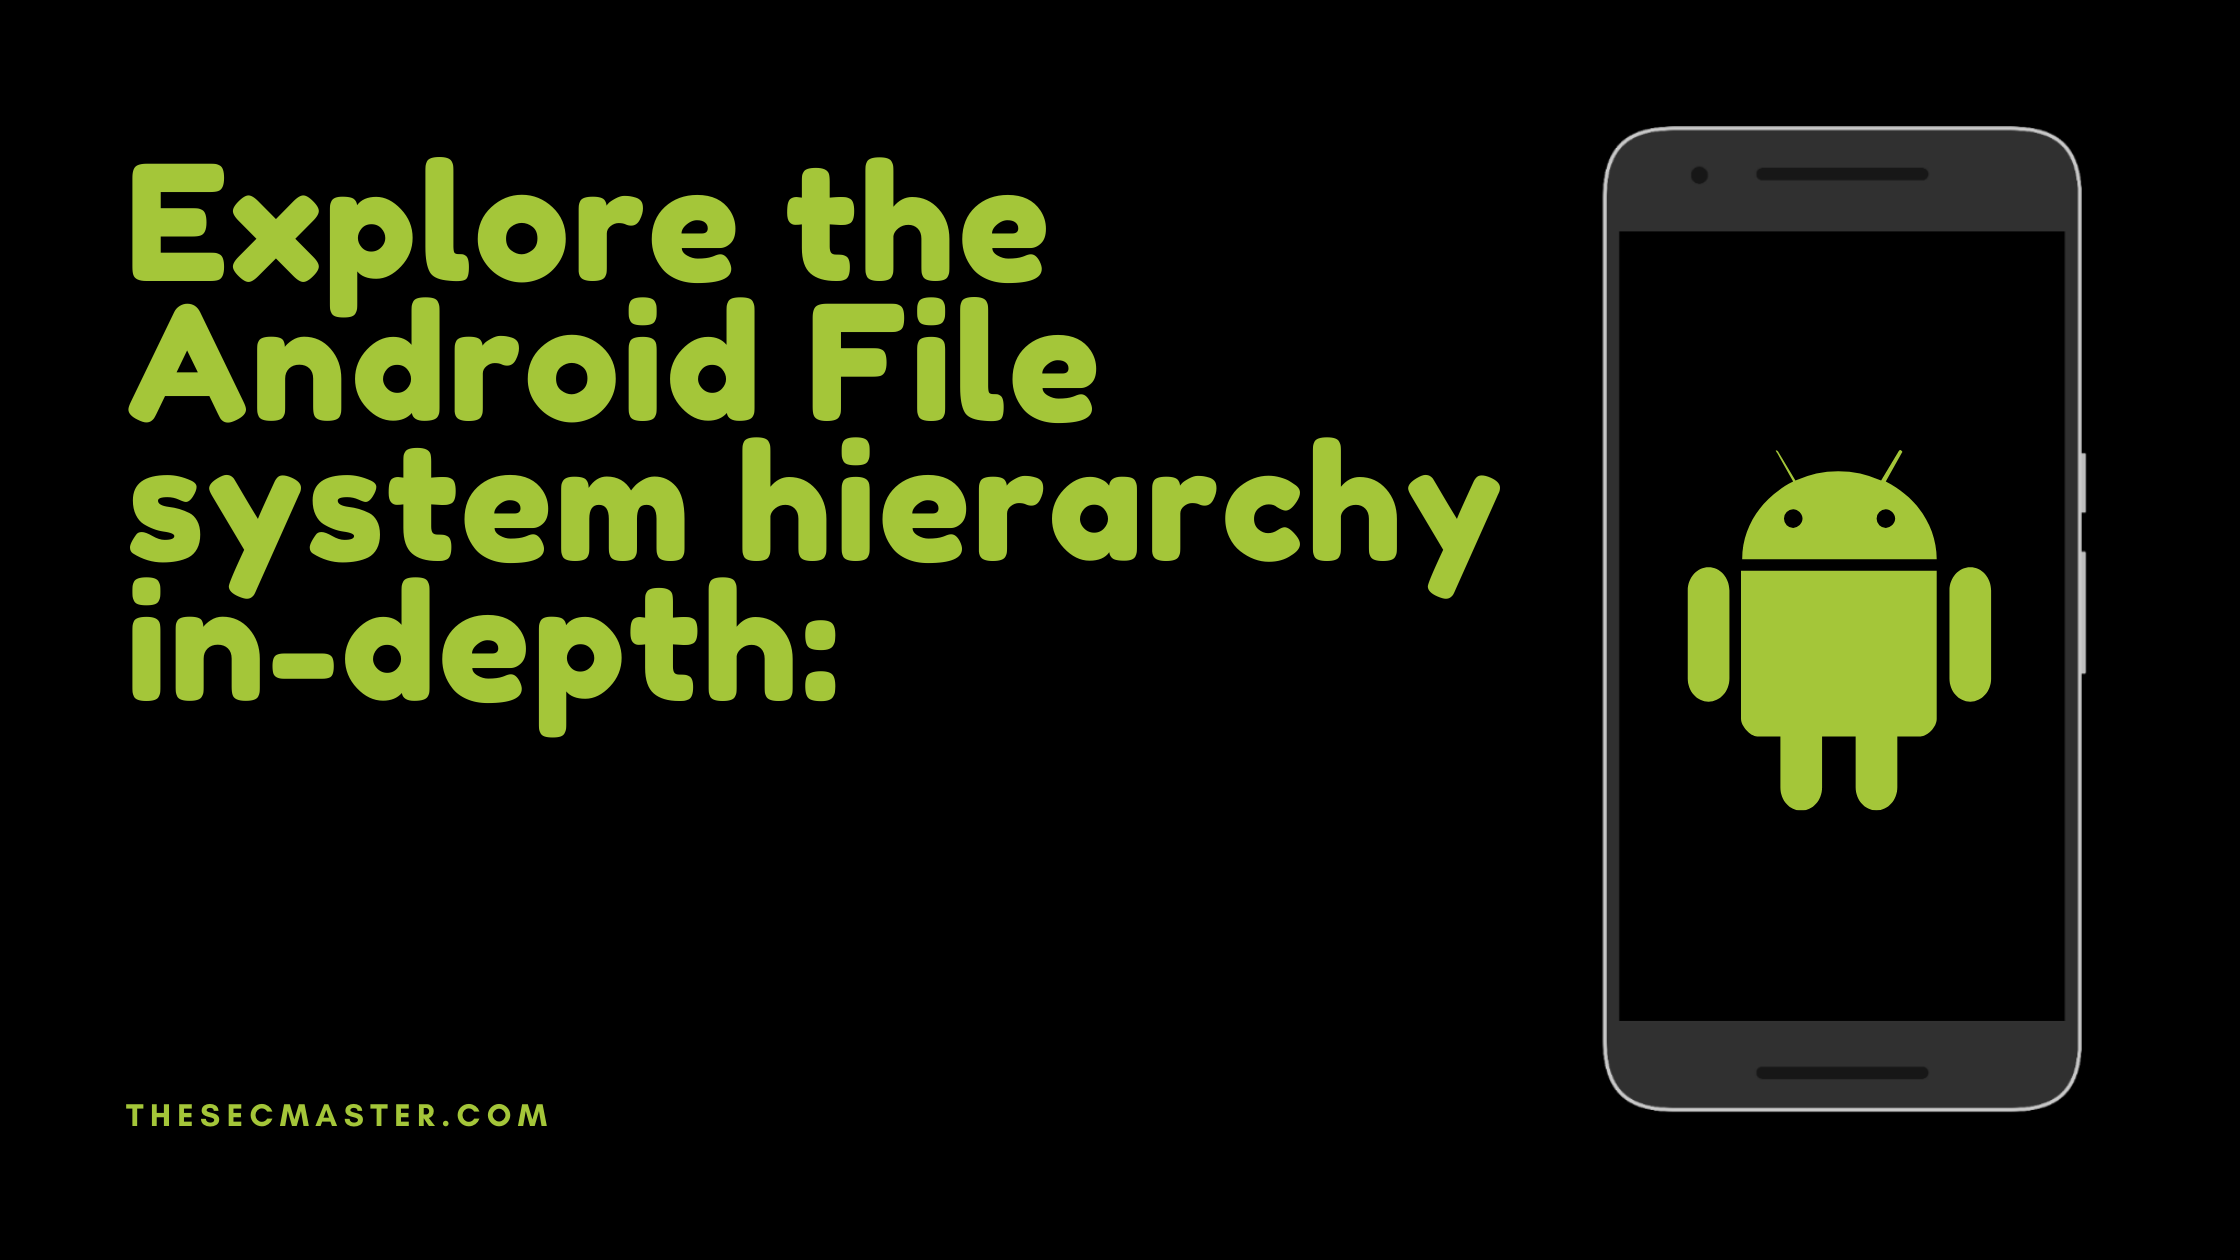 Explore The Android File System Hierarchy In Dept